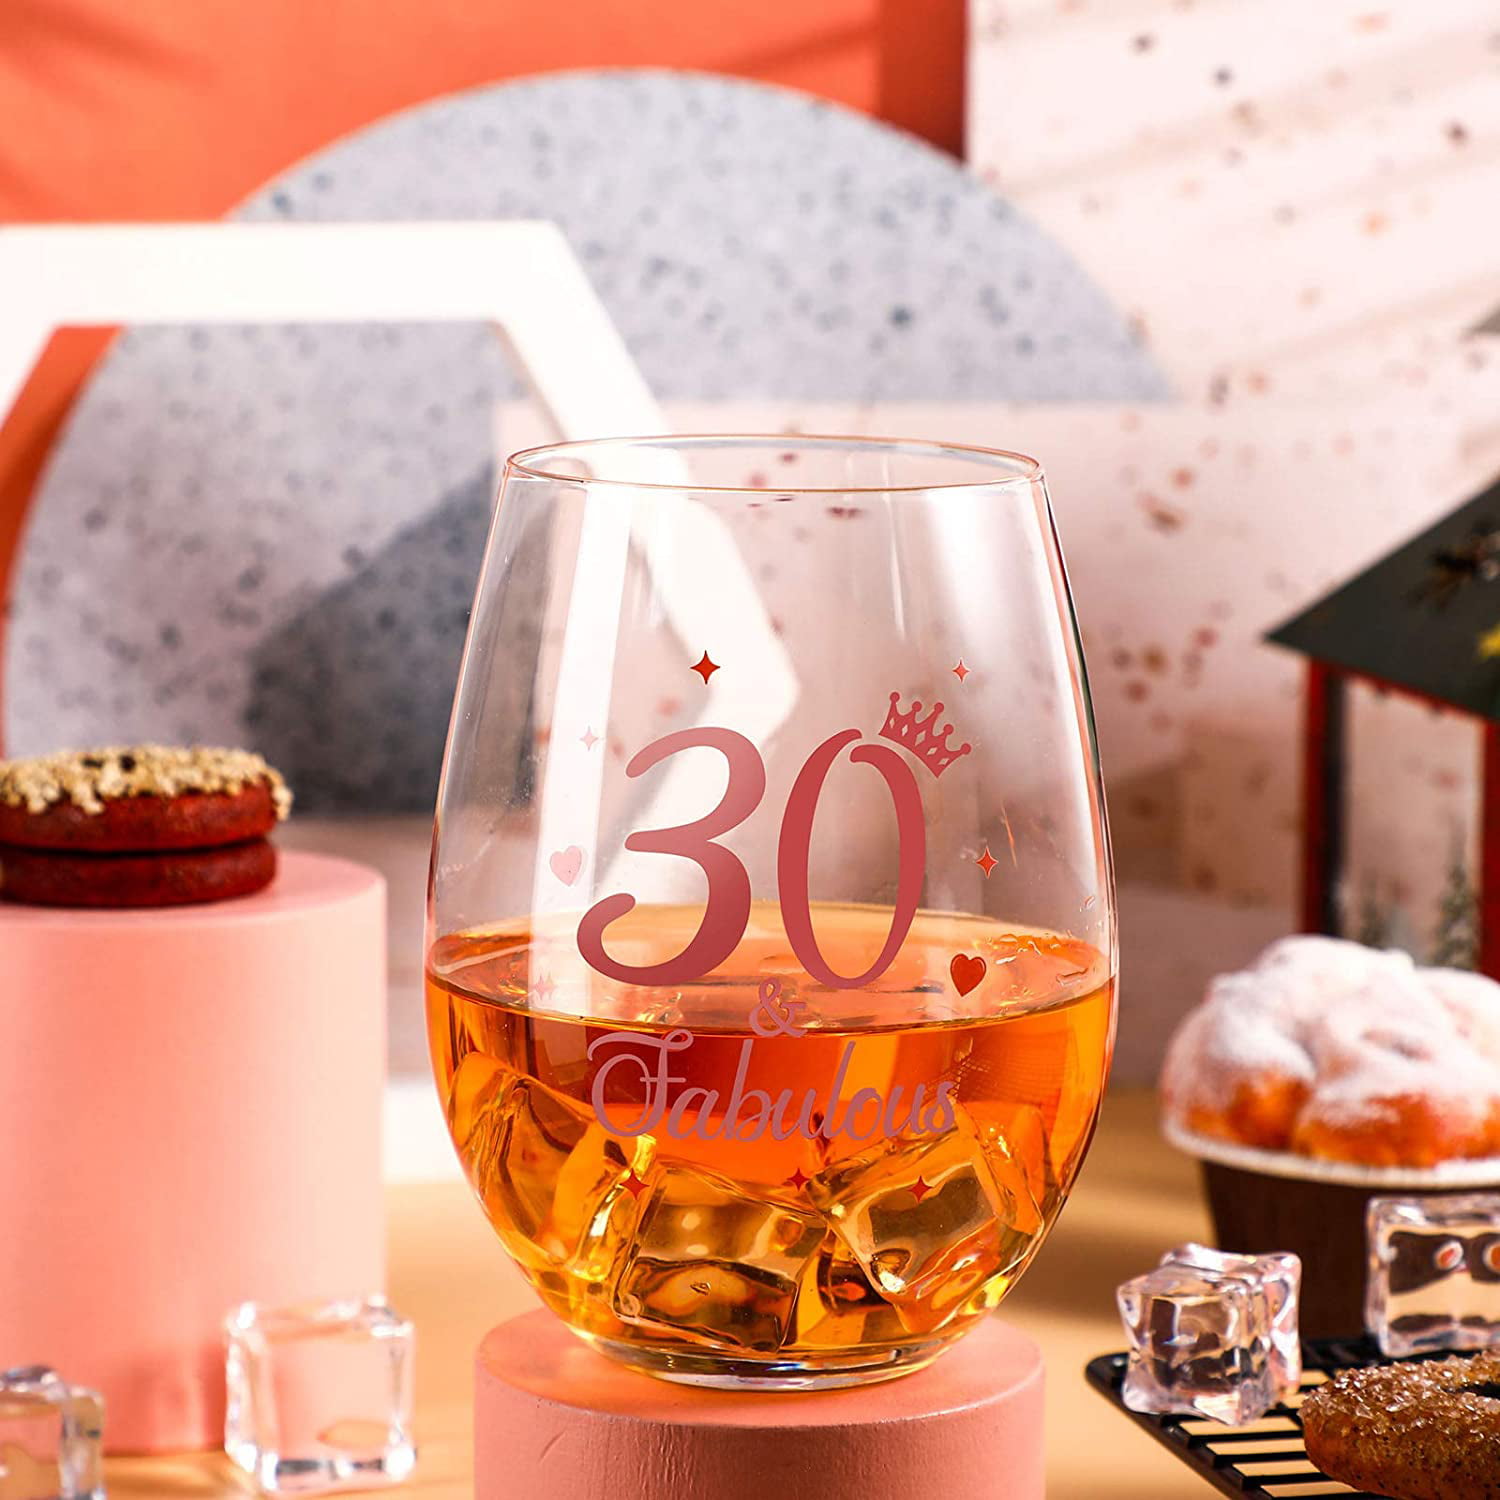 30 and Fabulous Stemless Wine Glass Rose Gold Birthday Wine Glass Present Anniversary Glasses for Man Women Birthday Party Wedding Anniversary Decorations 17 oz